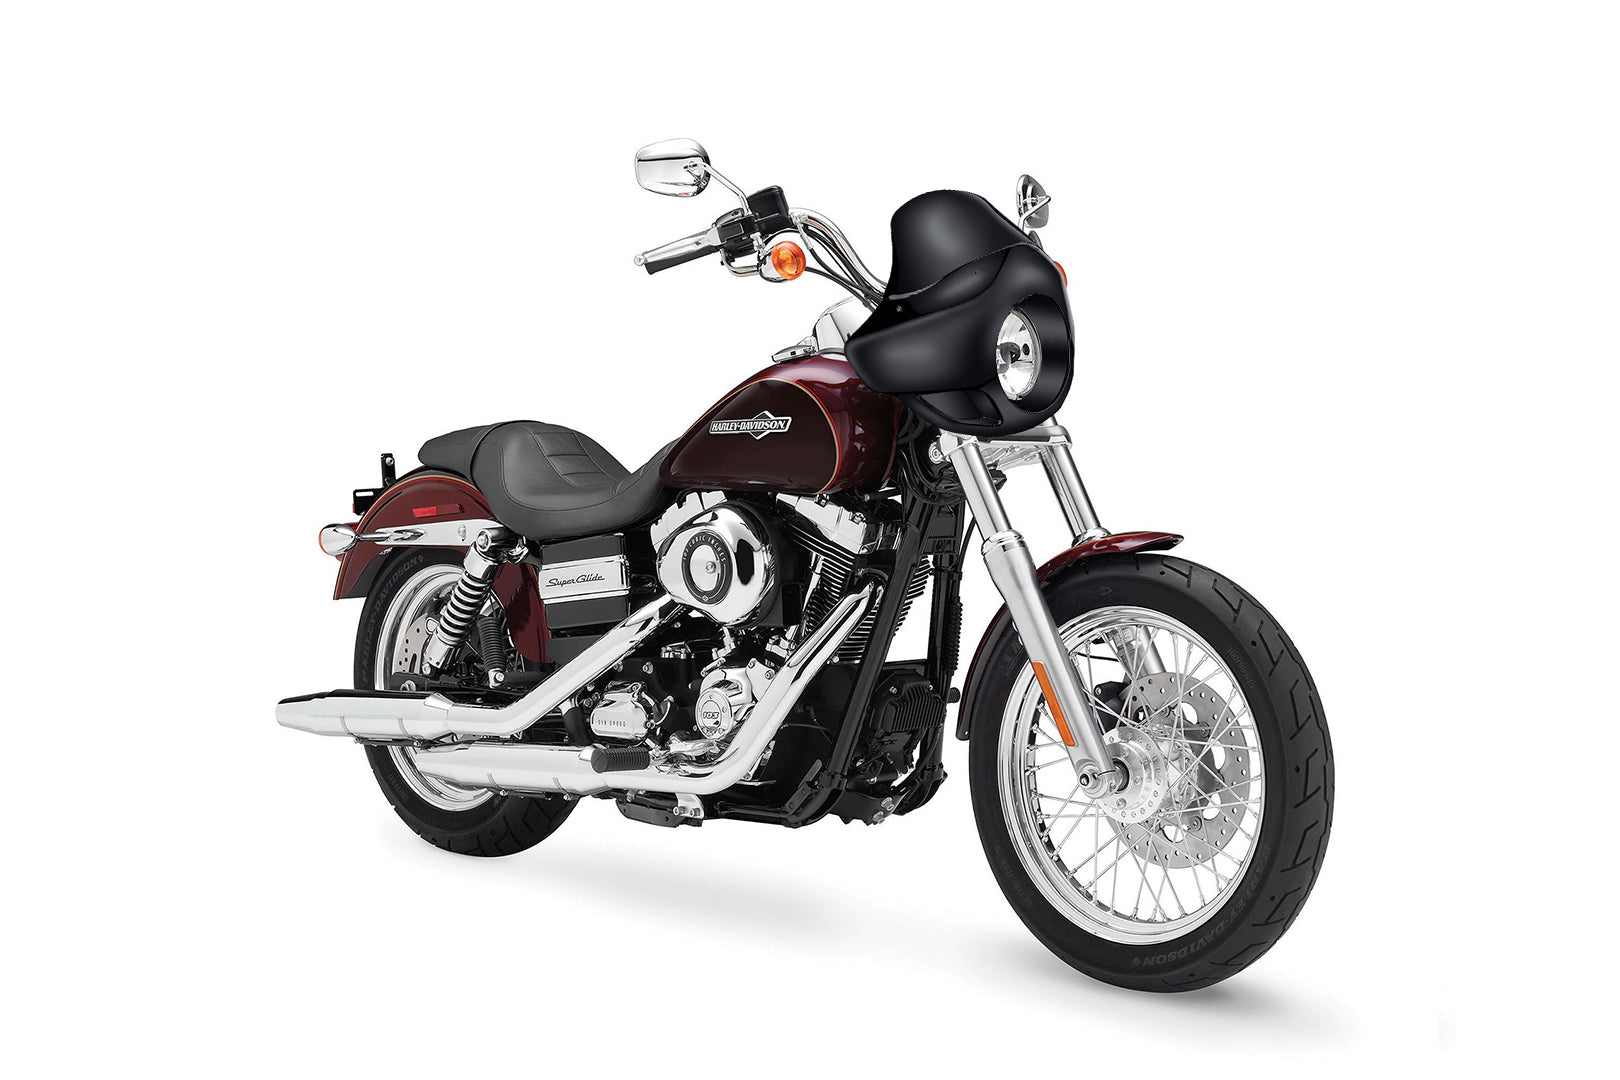 Viking Derby Motorcycle Fairing For Harley Dyna Super Glide FXD Gloss Black Bag on Bike View @expand